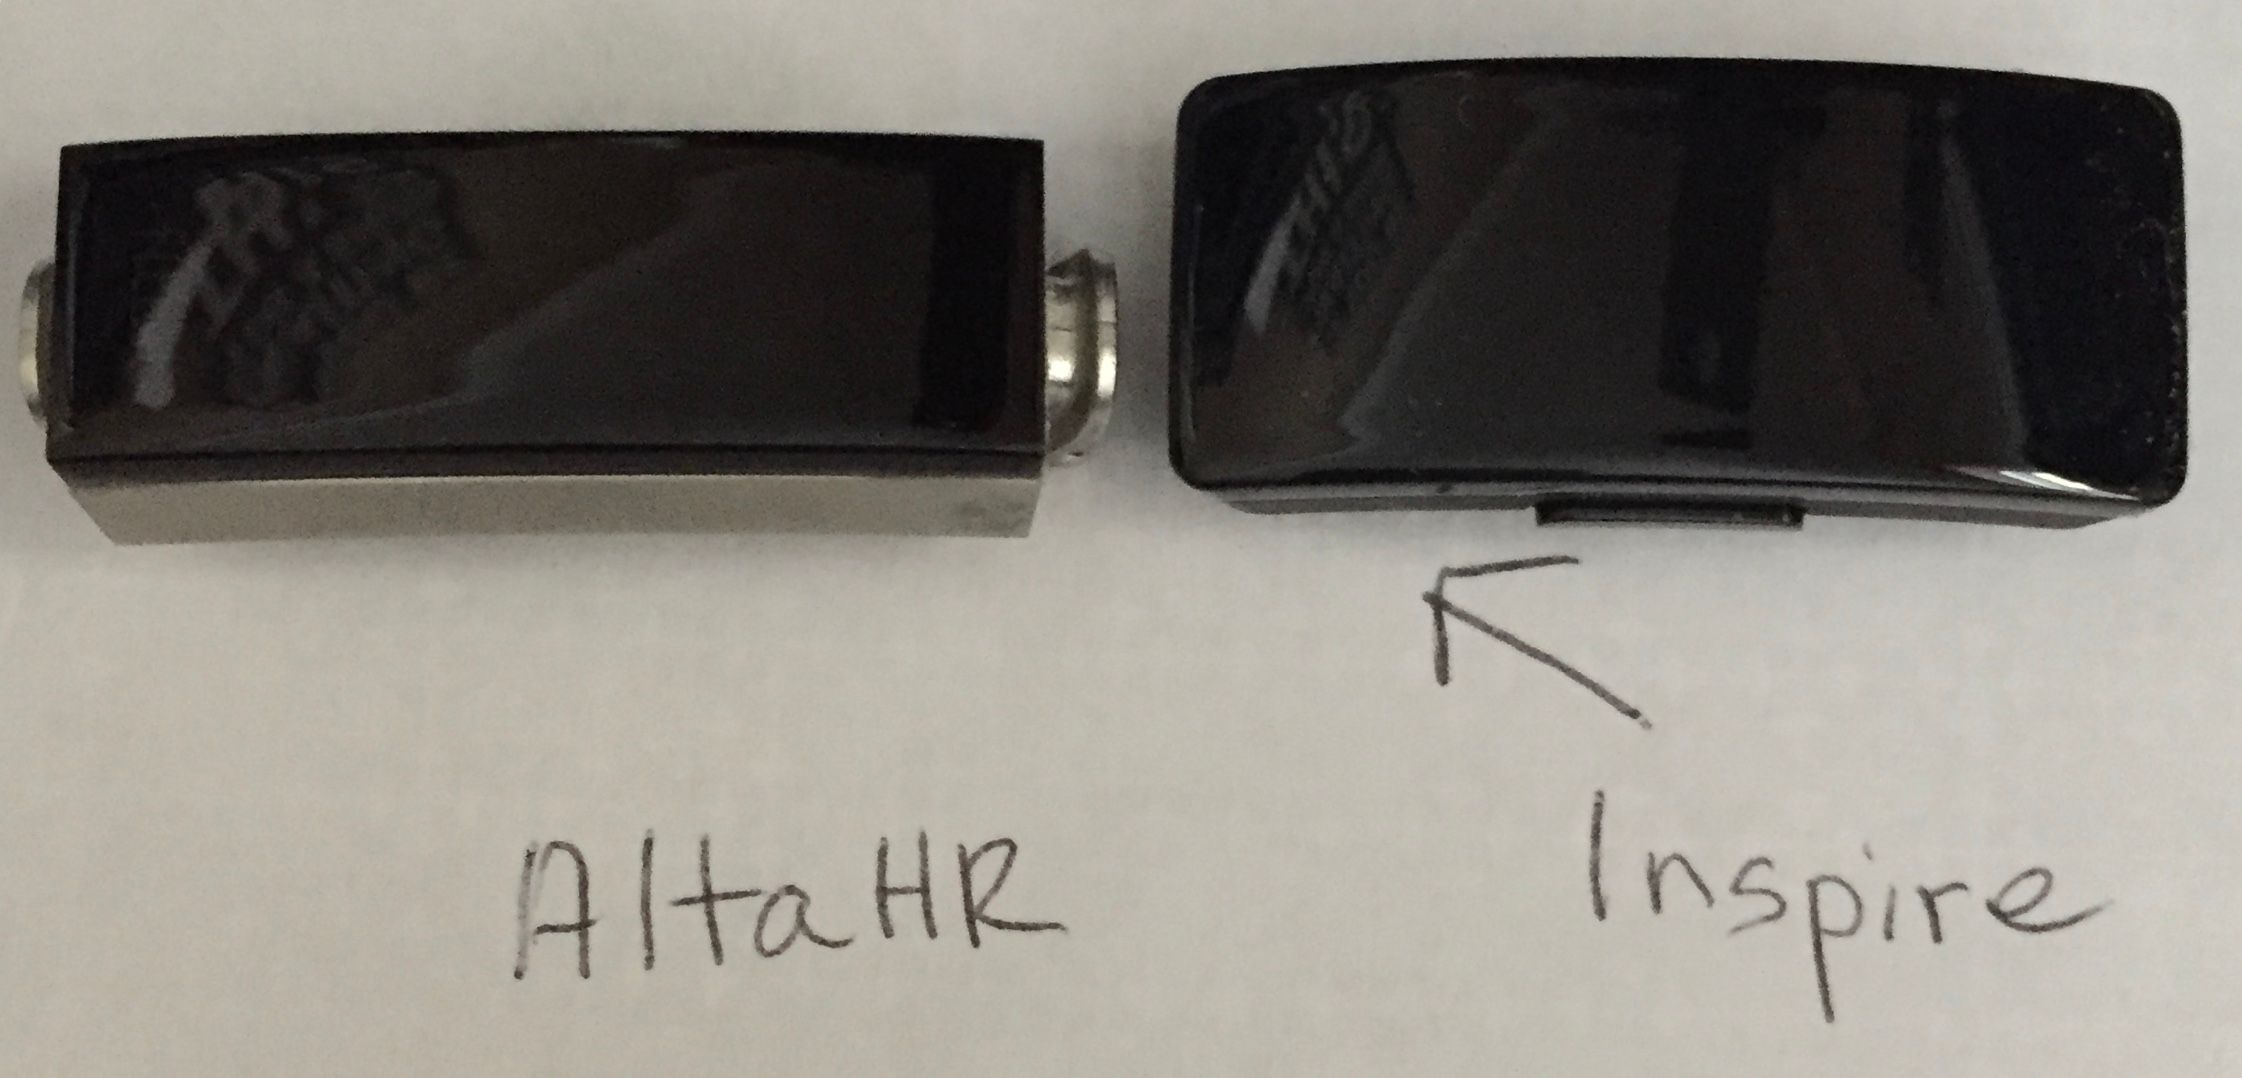 difference between fitbit alta and inspire